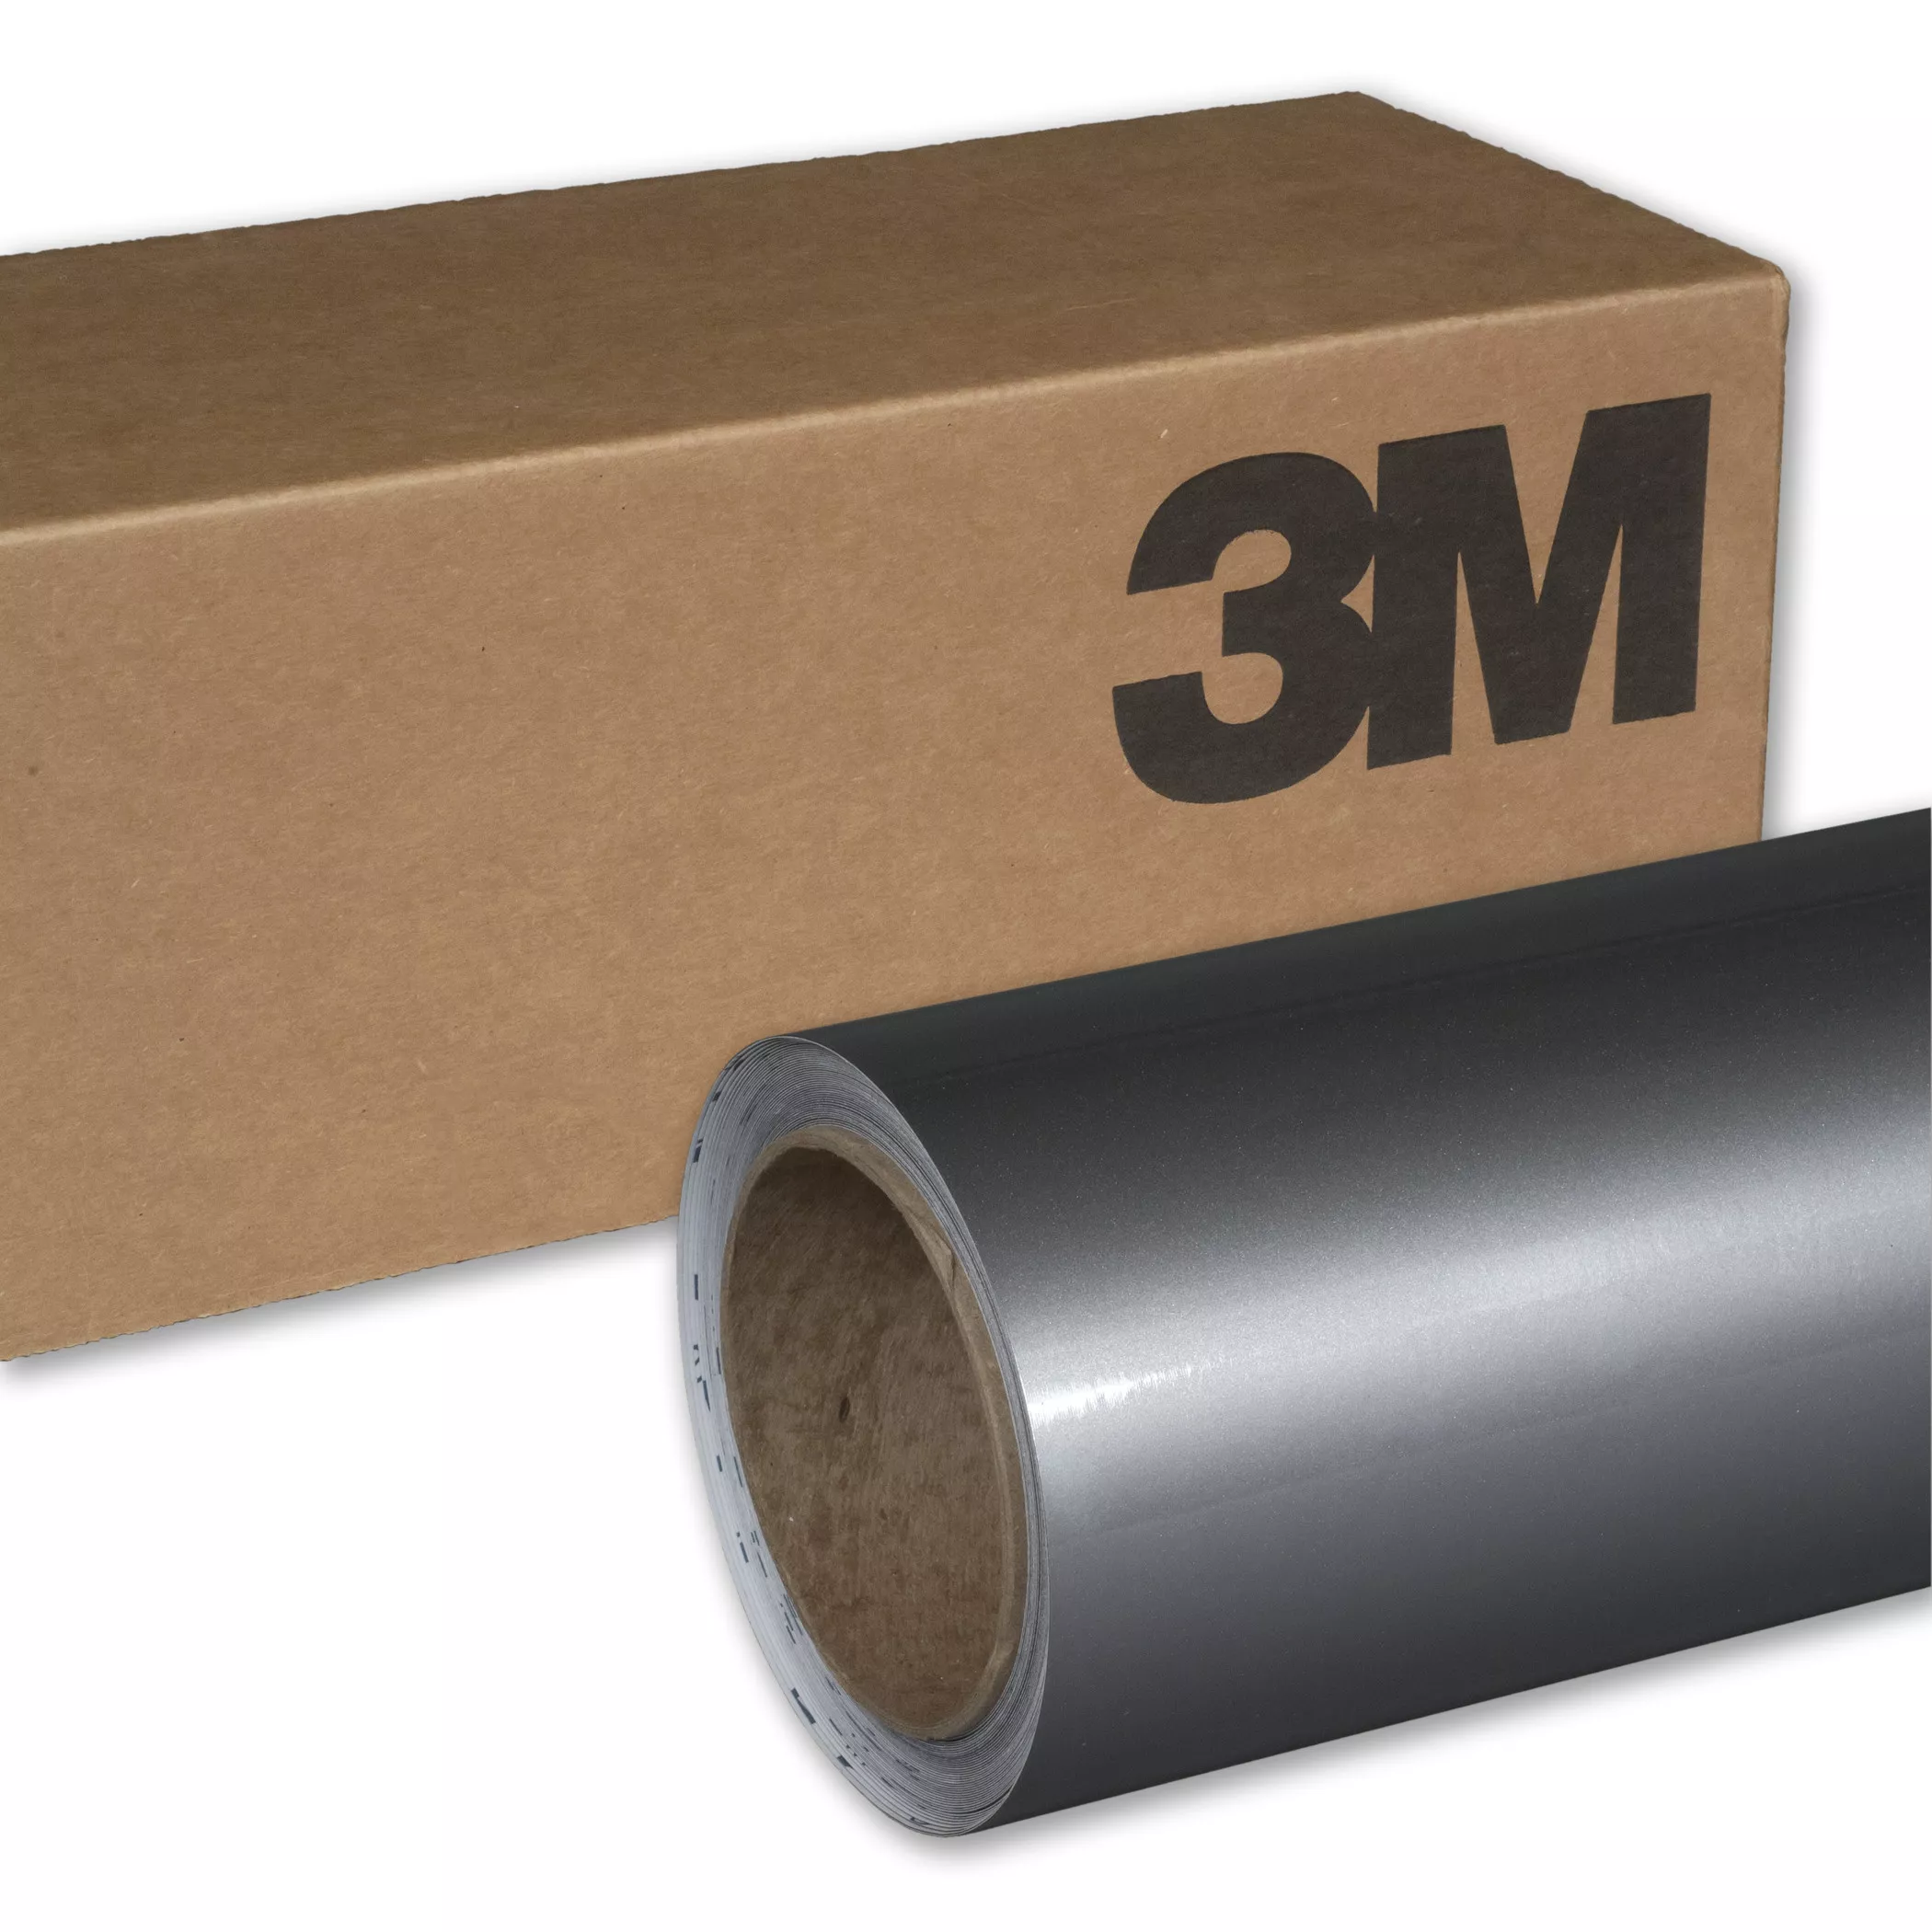 3M™ Wrap Film Series 1080-G251, Gloss Sterling Silver, 60 in x 5 yd